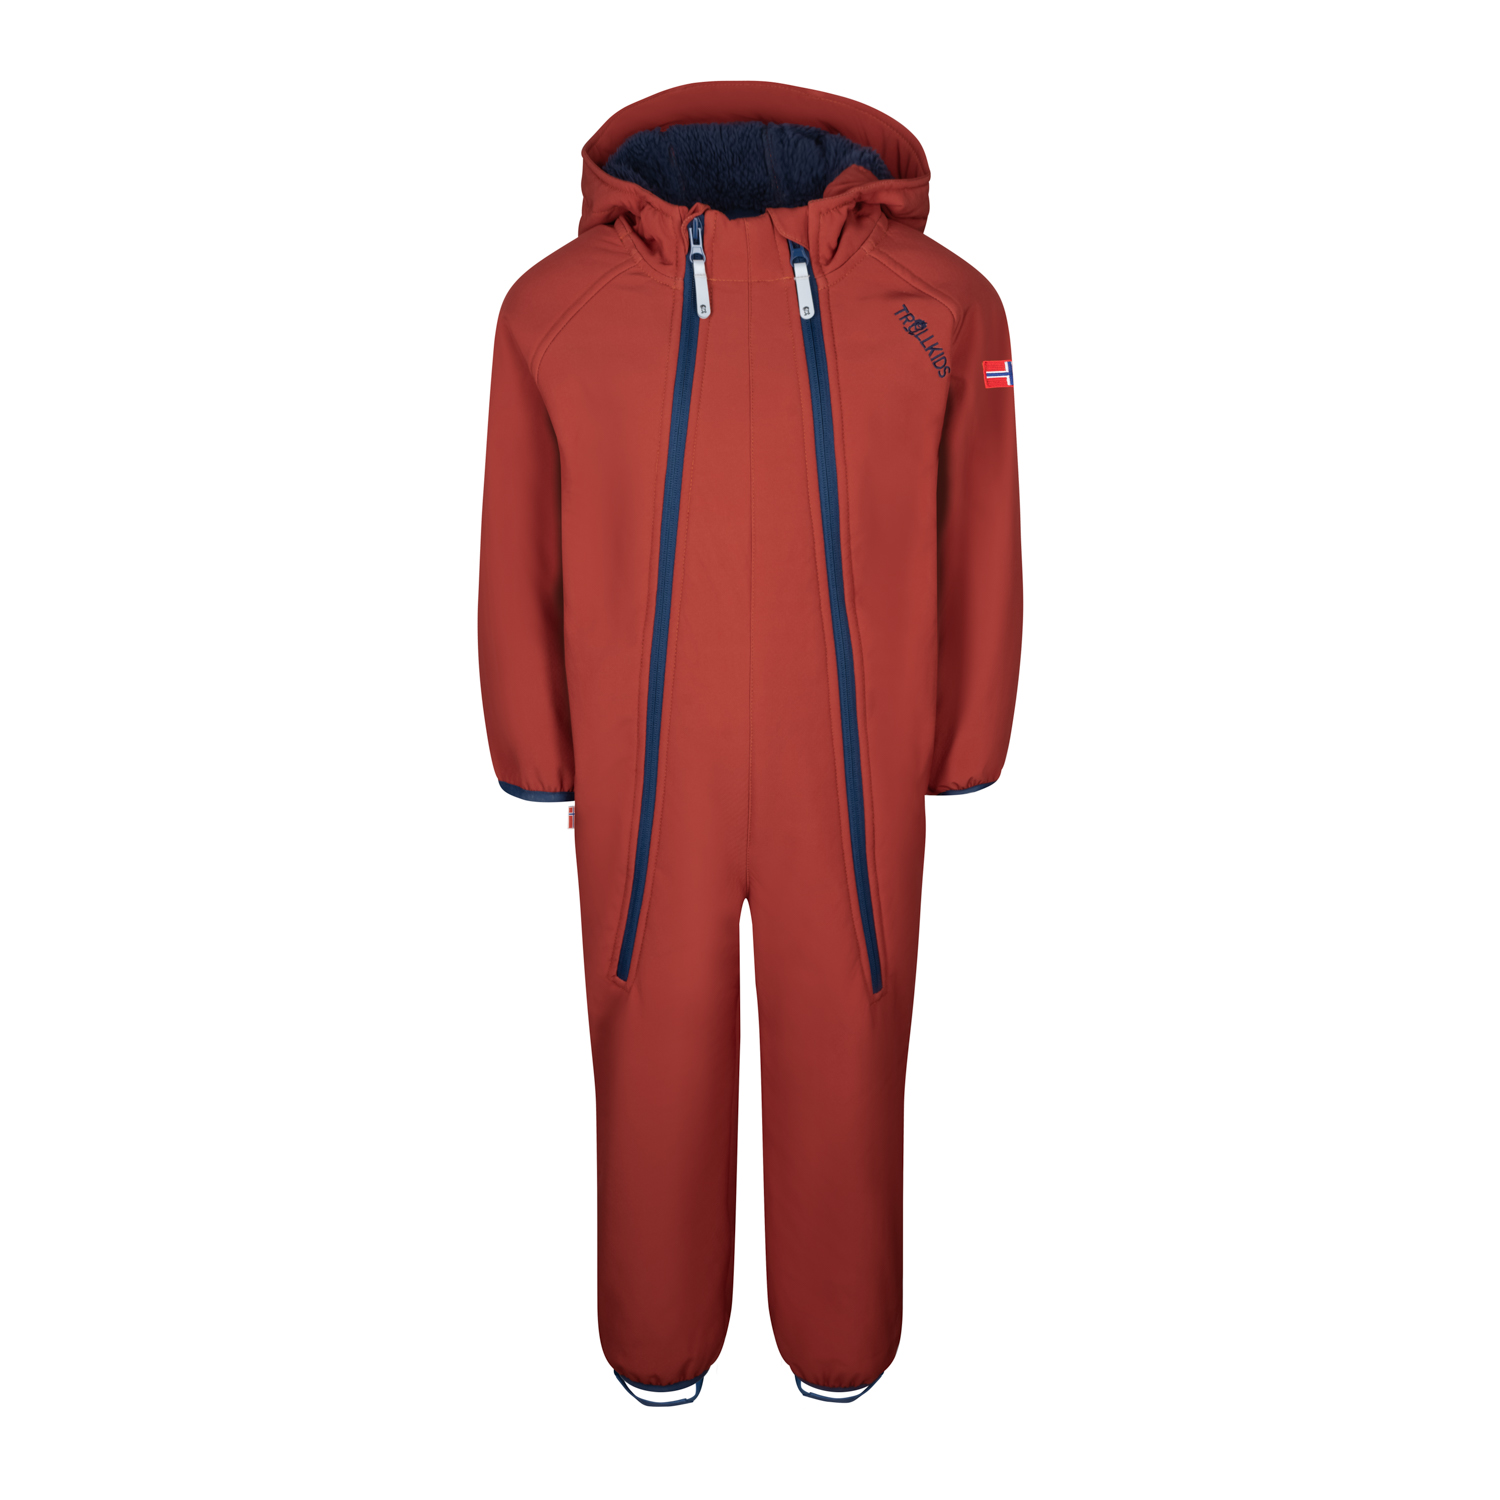 Trollkids Nordkapp Softshell Overall red clay/mystic blue